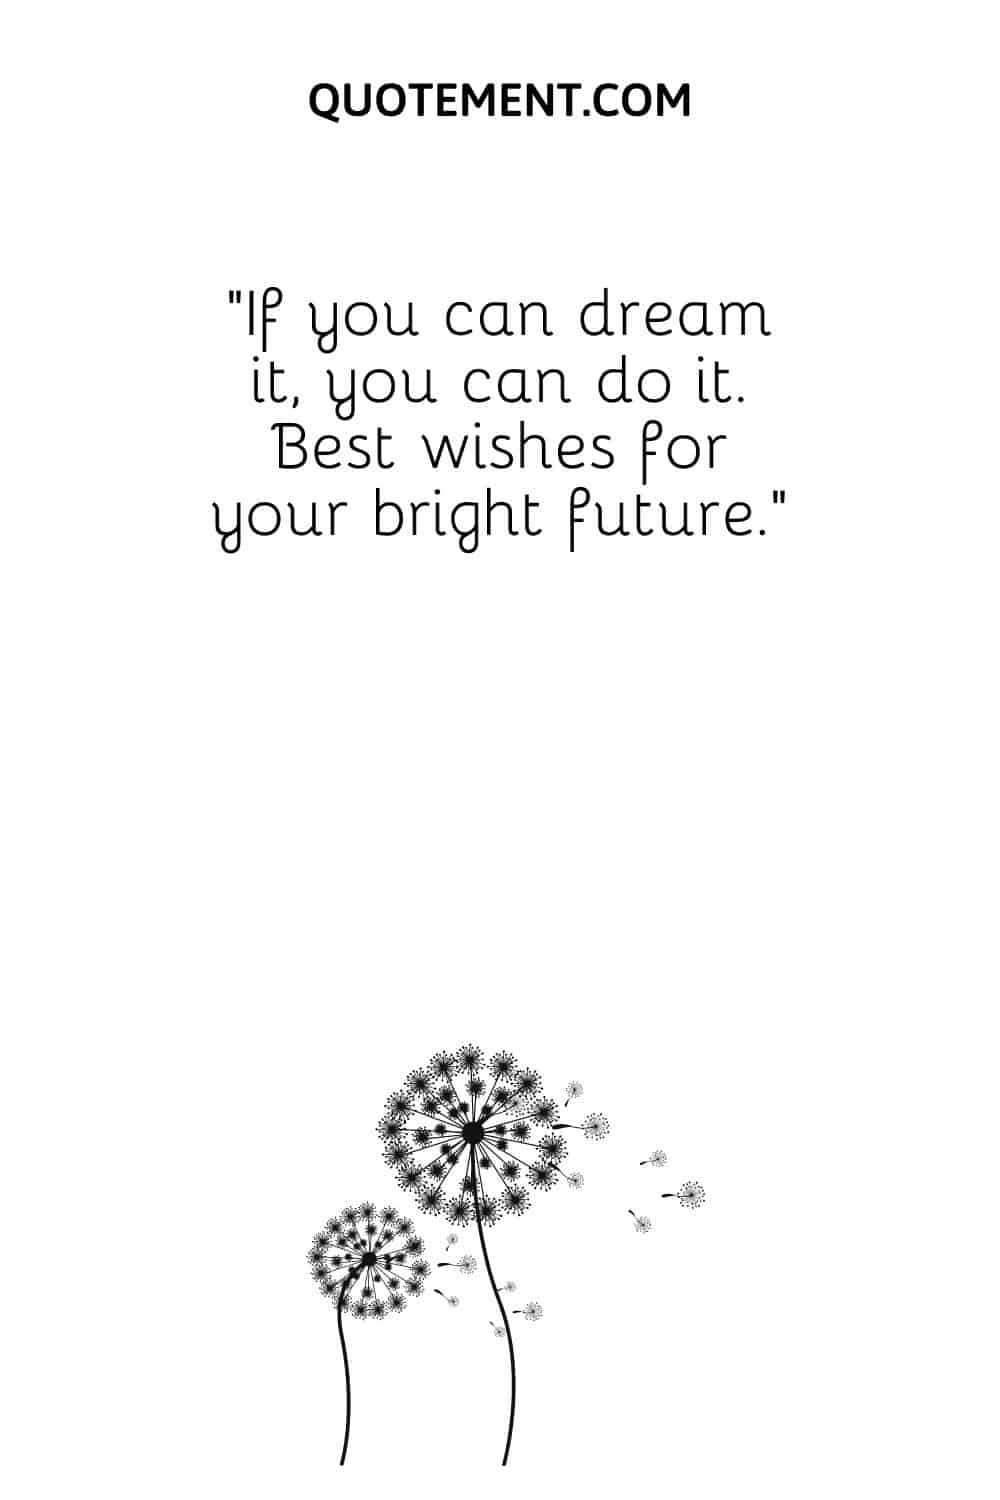 Best wishes for your bright future